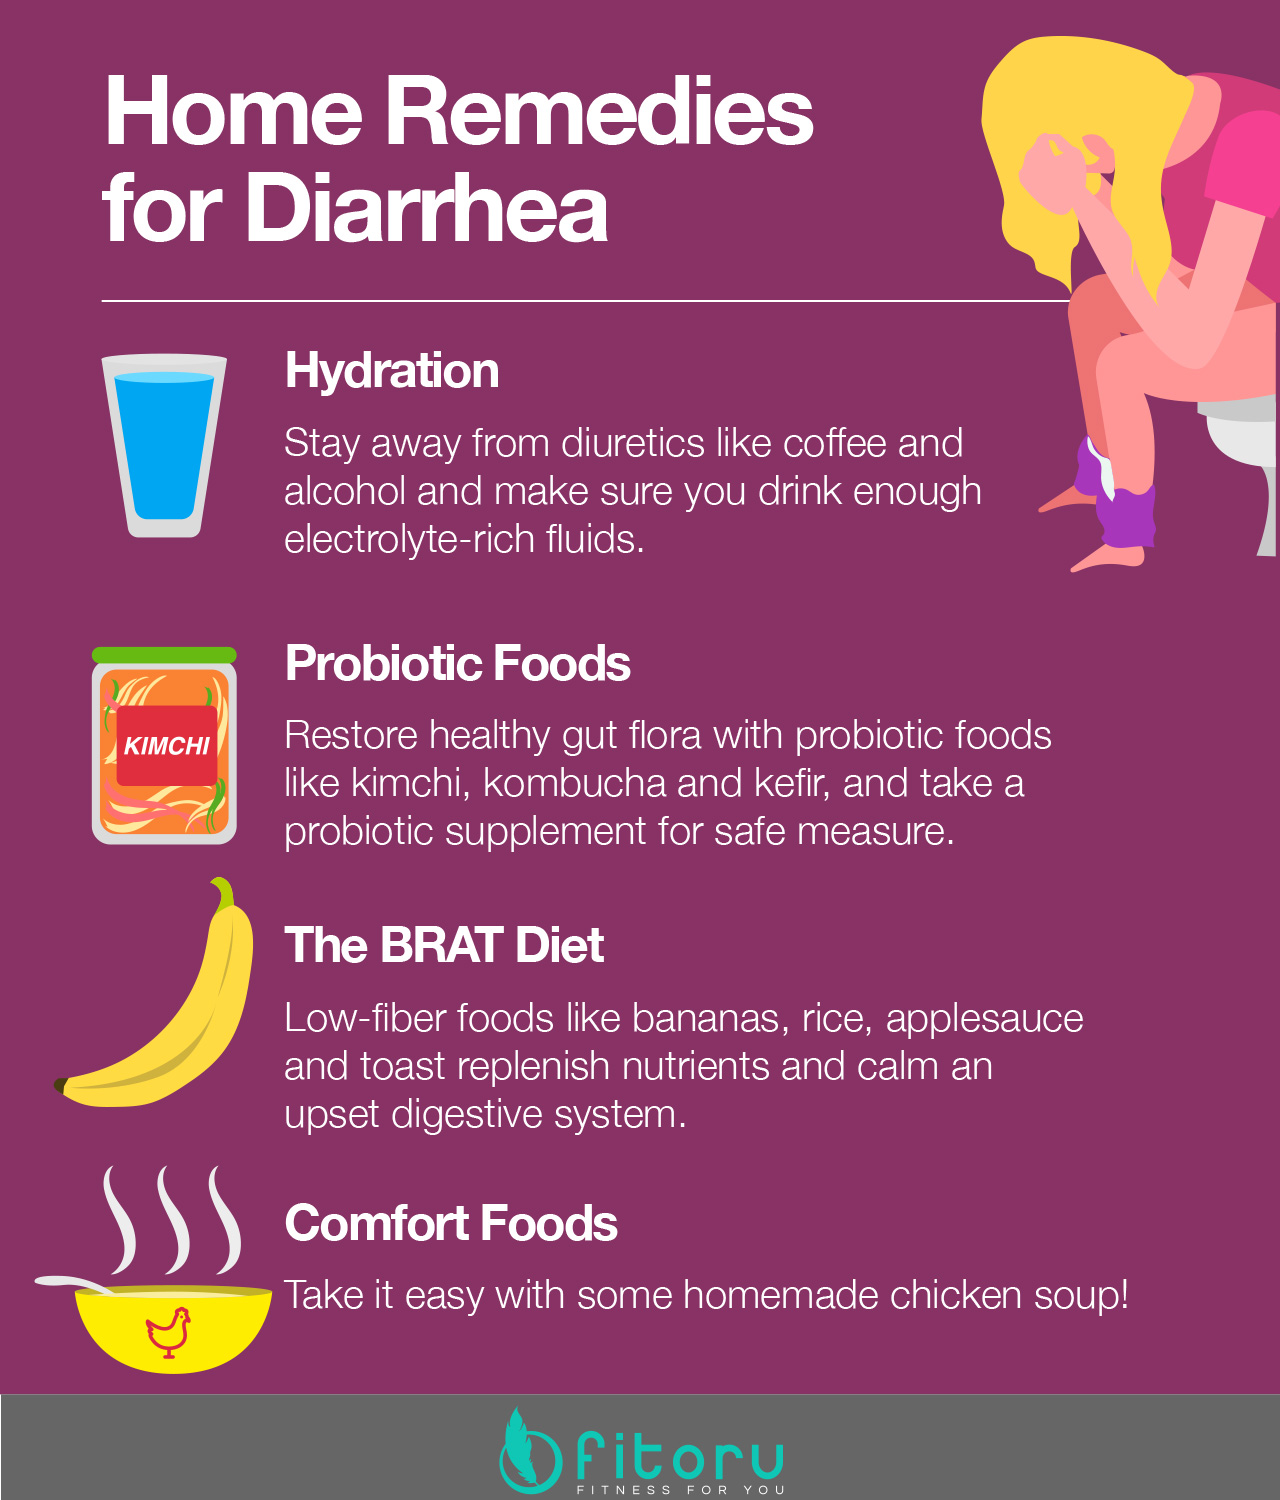 Home remedies and gentle foods for diarrhea.